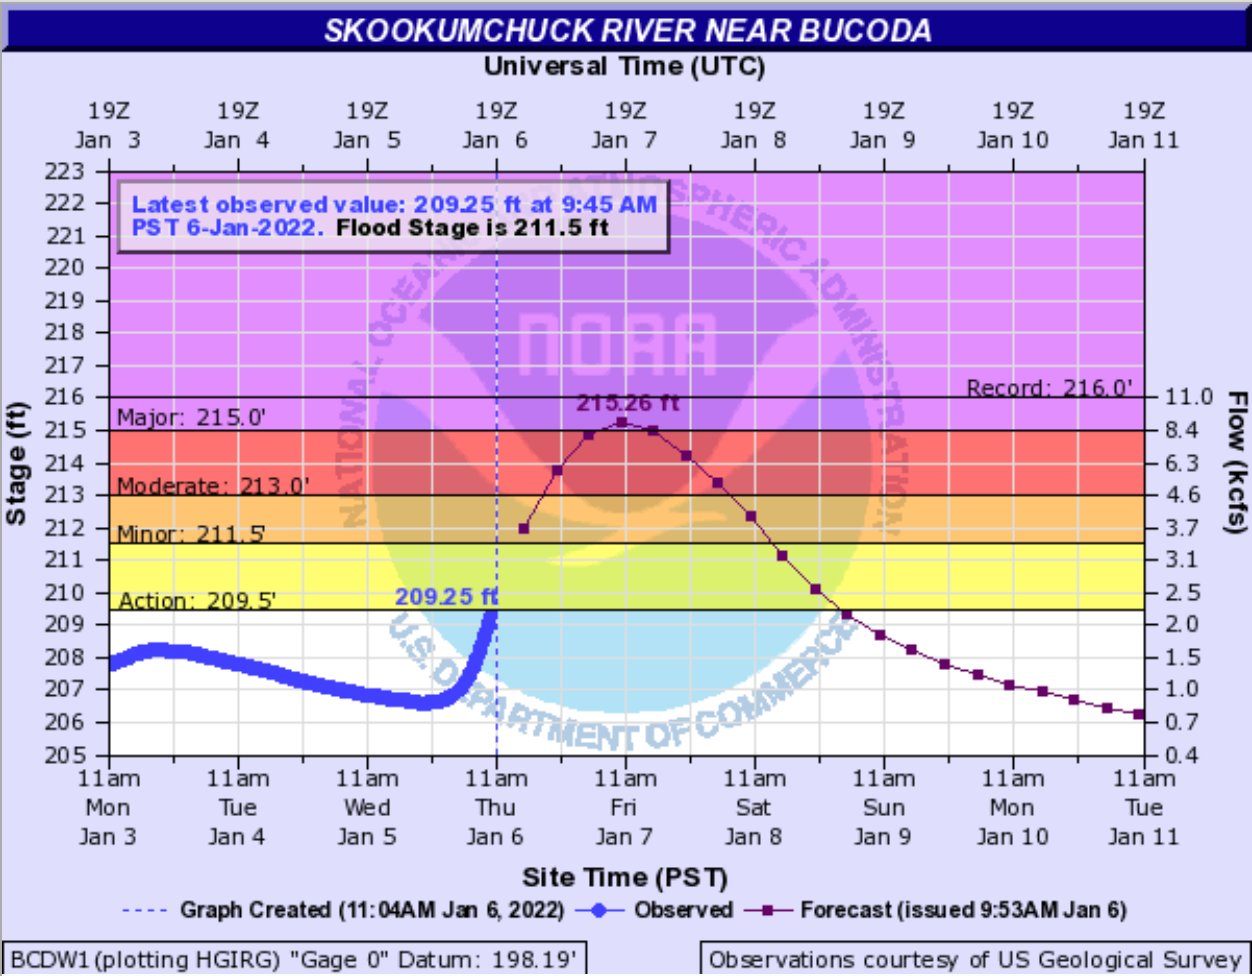 The National Weather Service (NWS) had the Skookumchuck River near Bucoda forecast to reach 215.26 feet late Friday morning, less than a foot under its historic peak at 216 feet in 2009. 